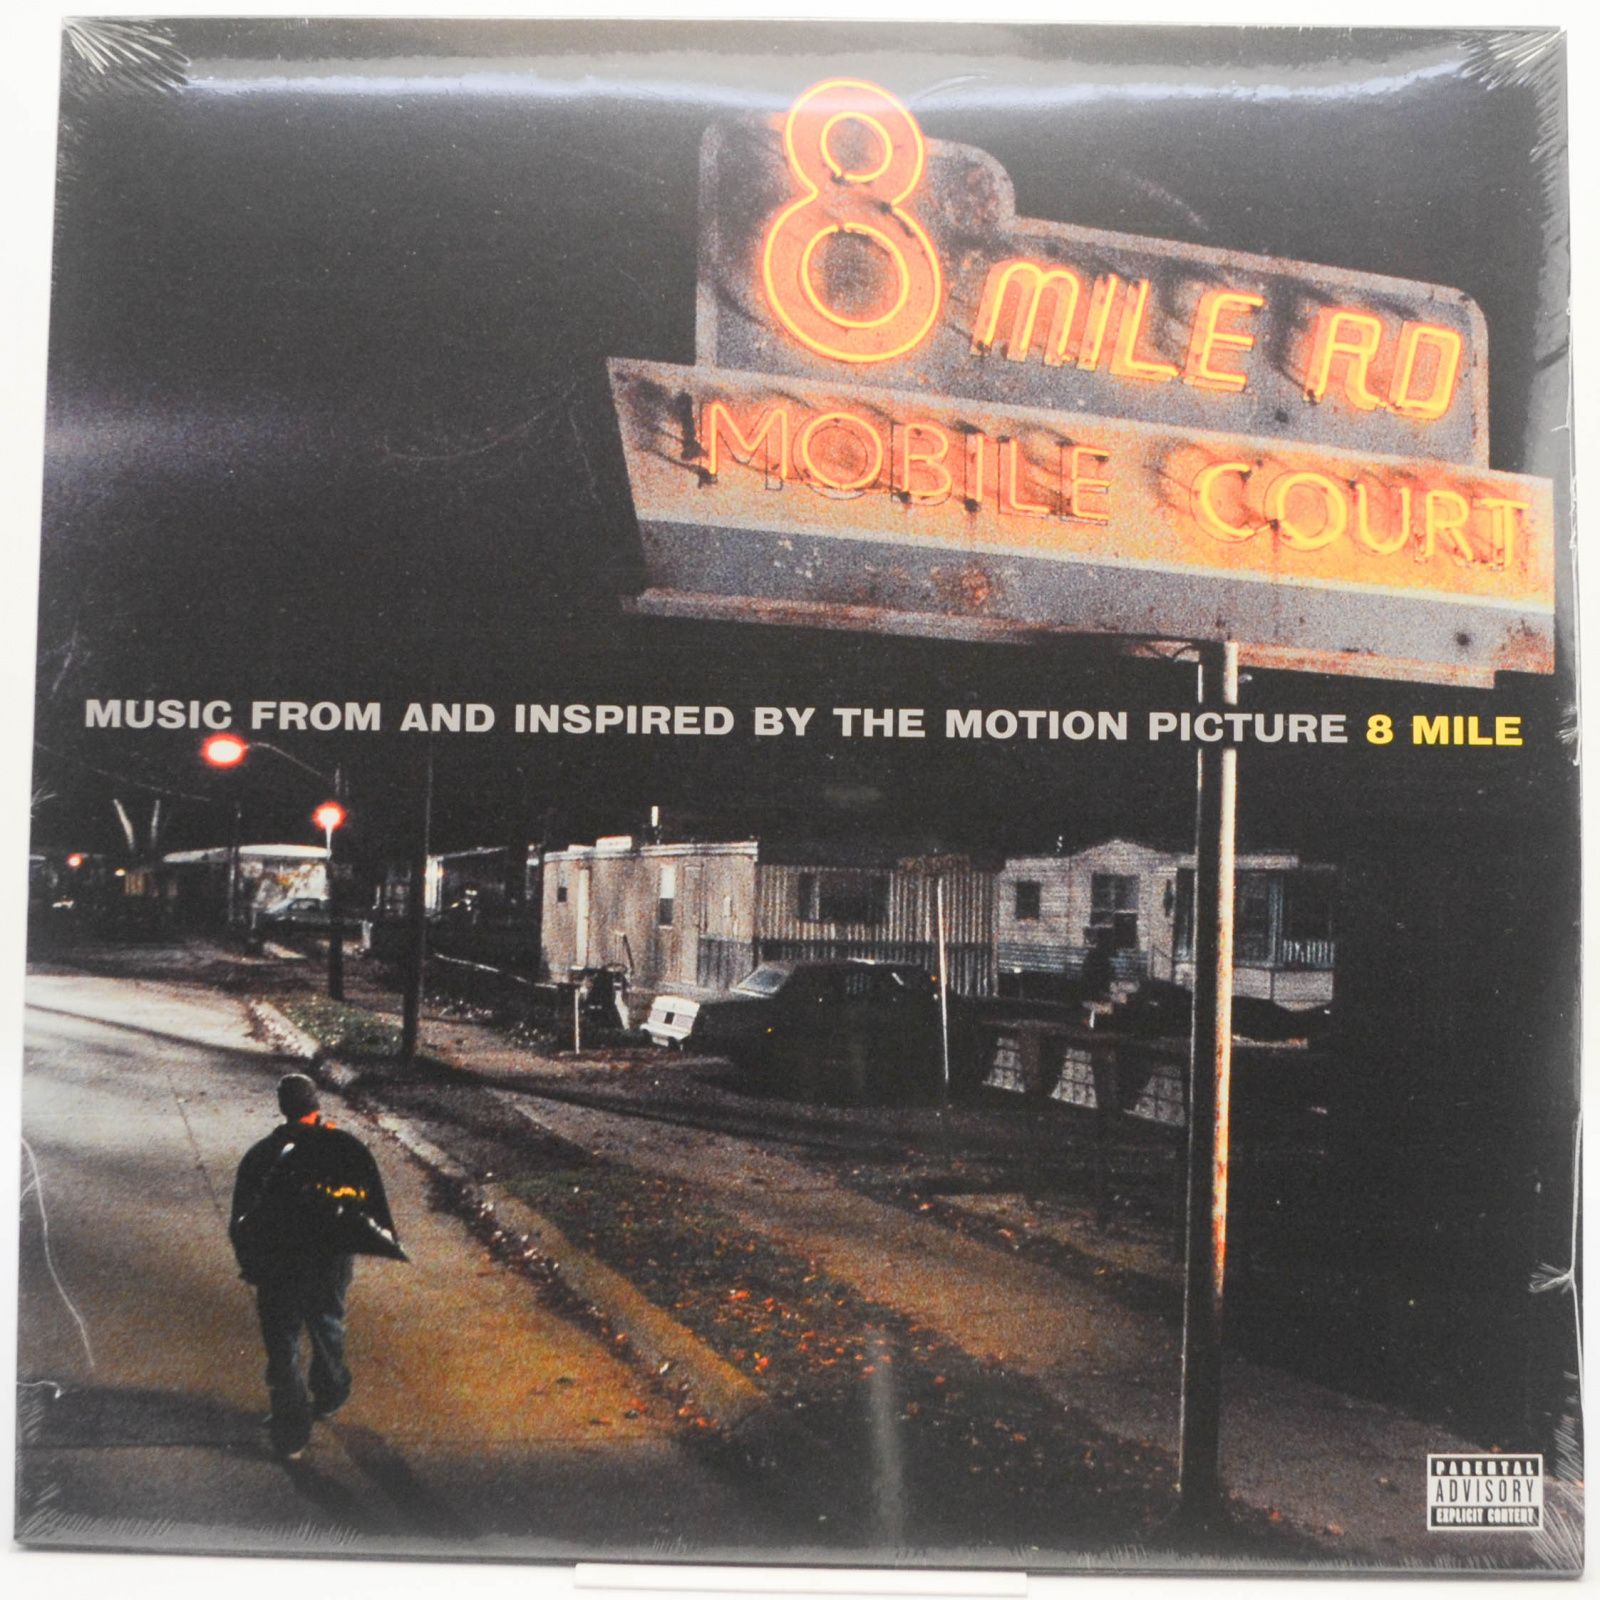 Music From And Inspired By The Motion Picture 8 Mile (2LP), 2002